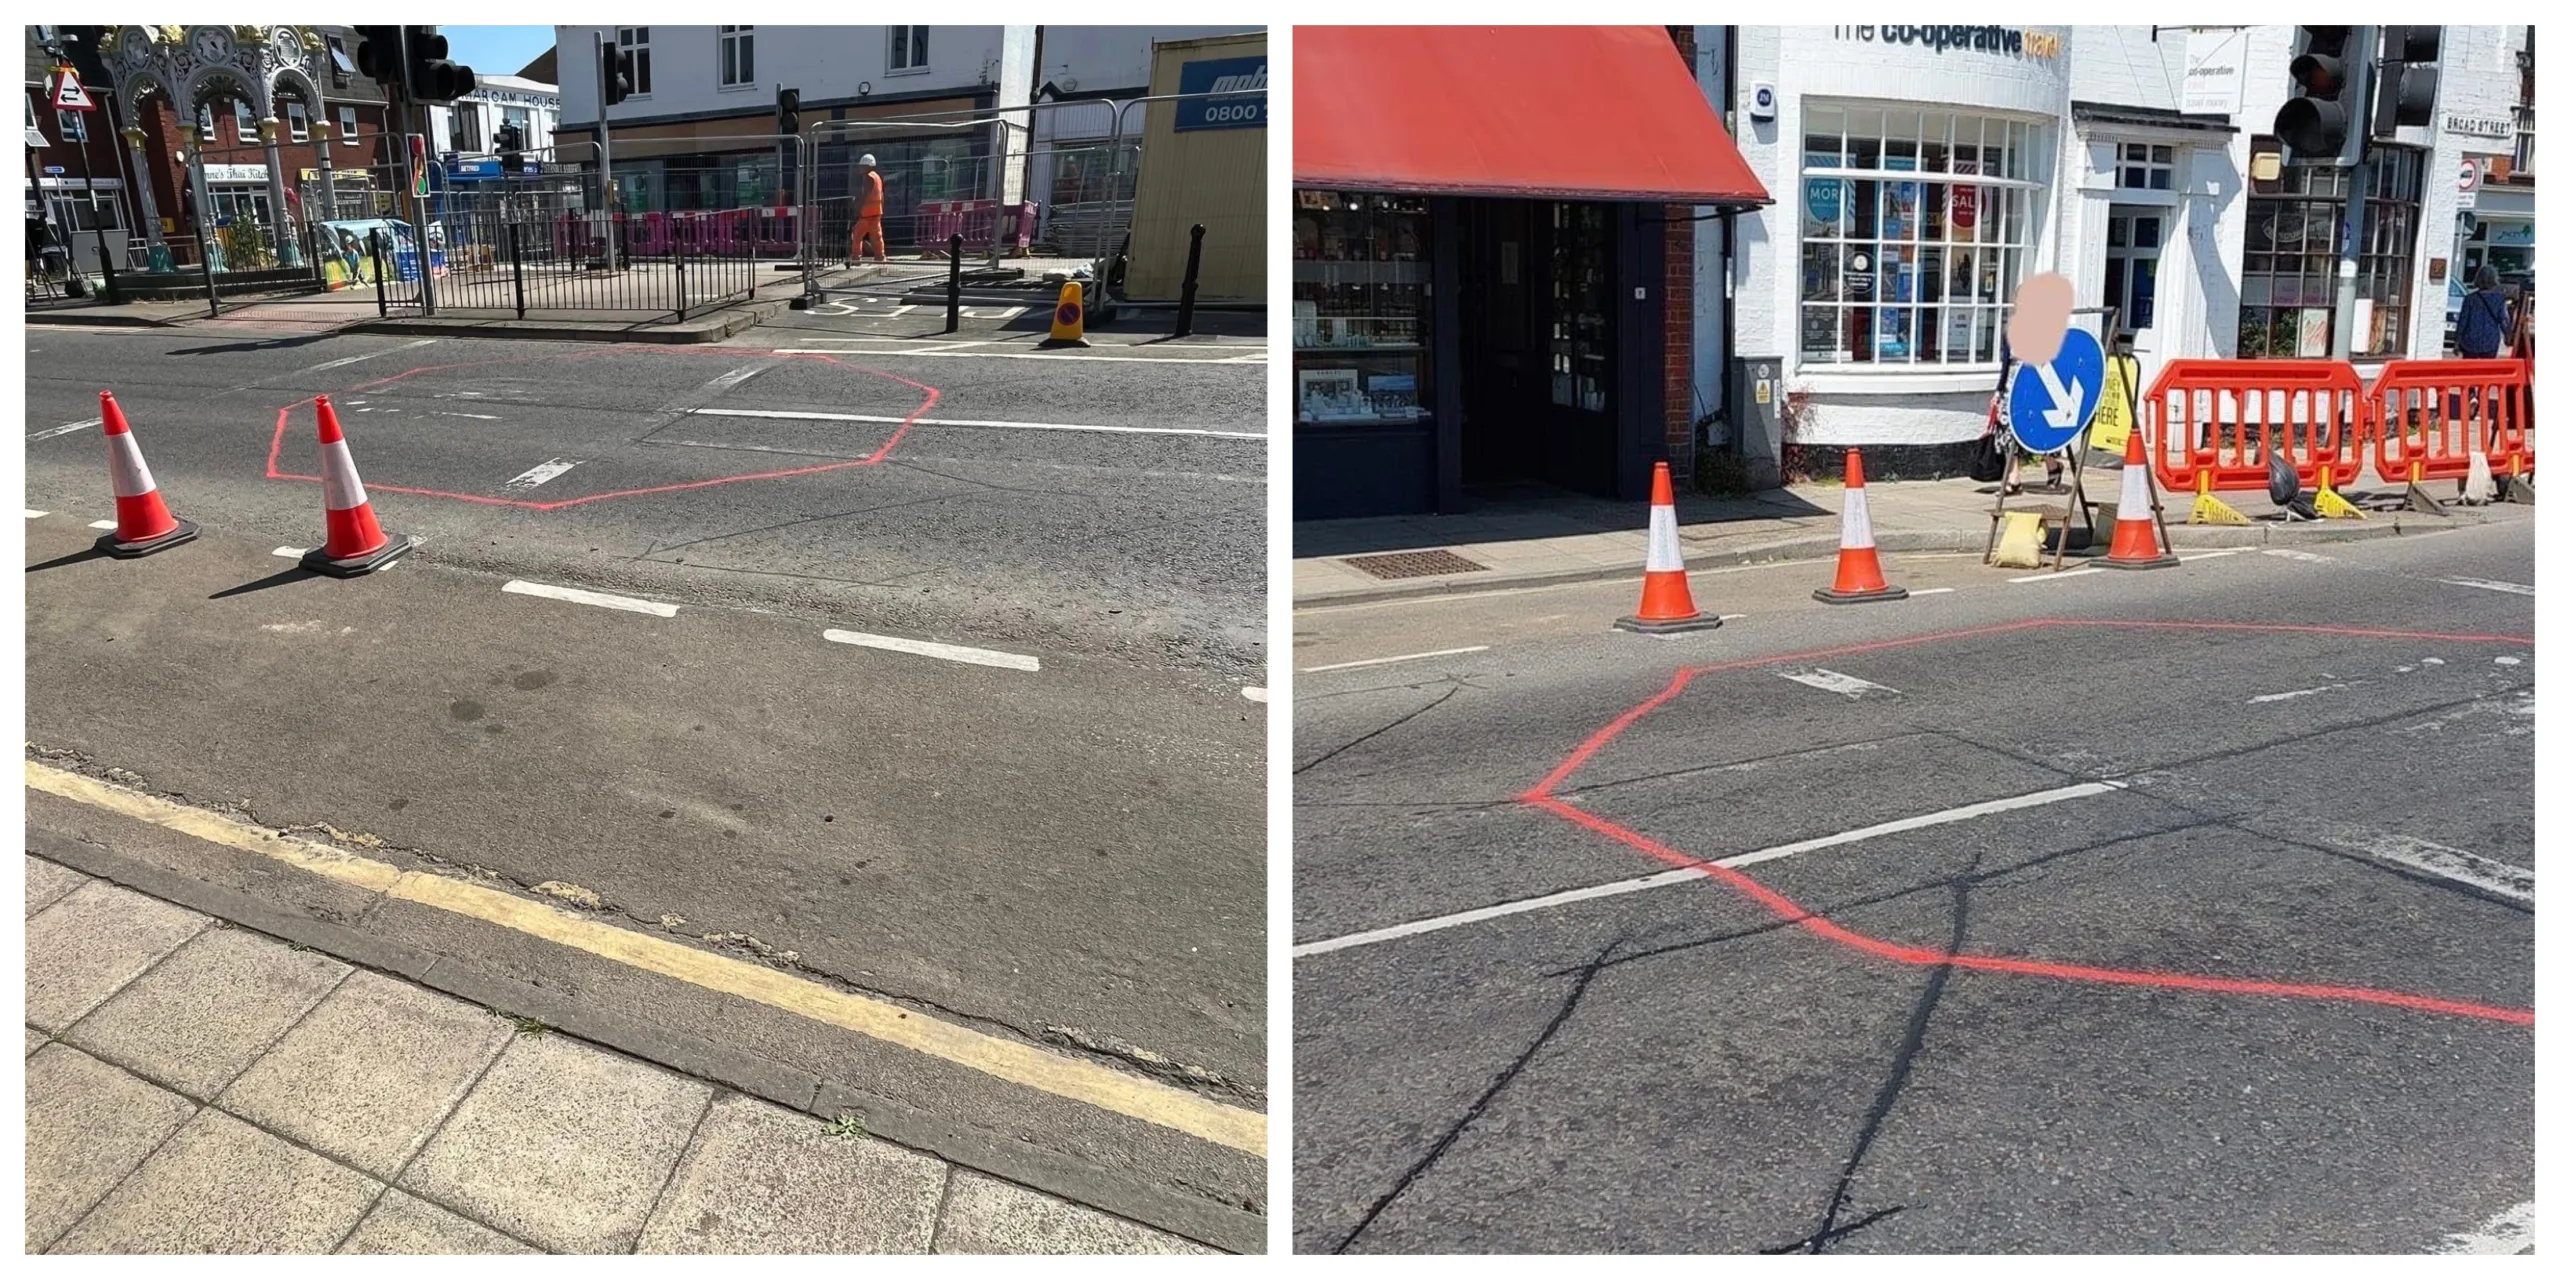 Official photo by Fenland Council (left) showing new position of March Fountain. On the right is the photo produced by Malletts jewellers which they claim shows the true horror of relocating it outside their shop.